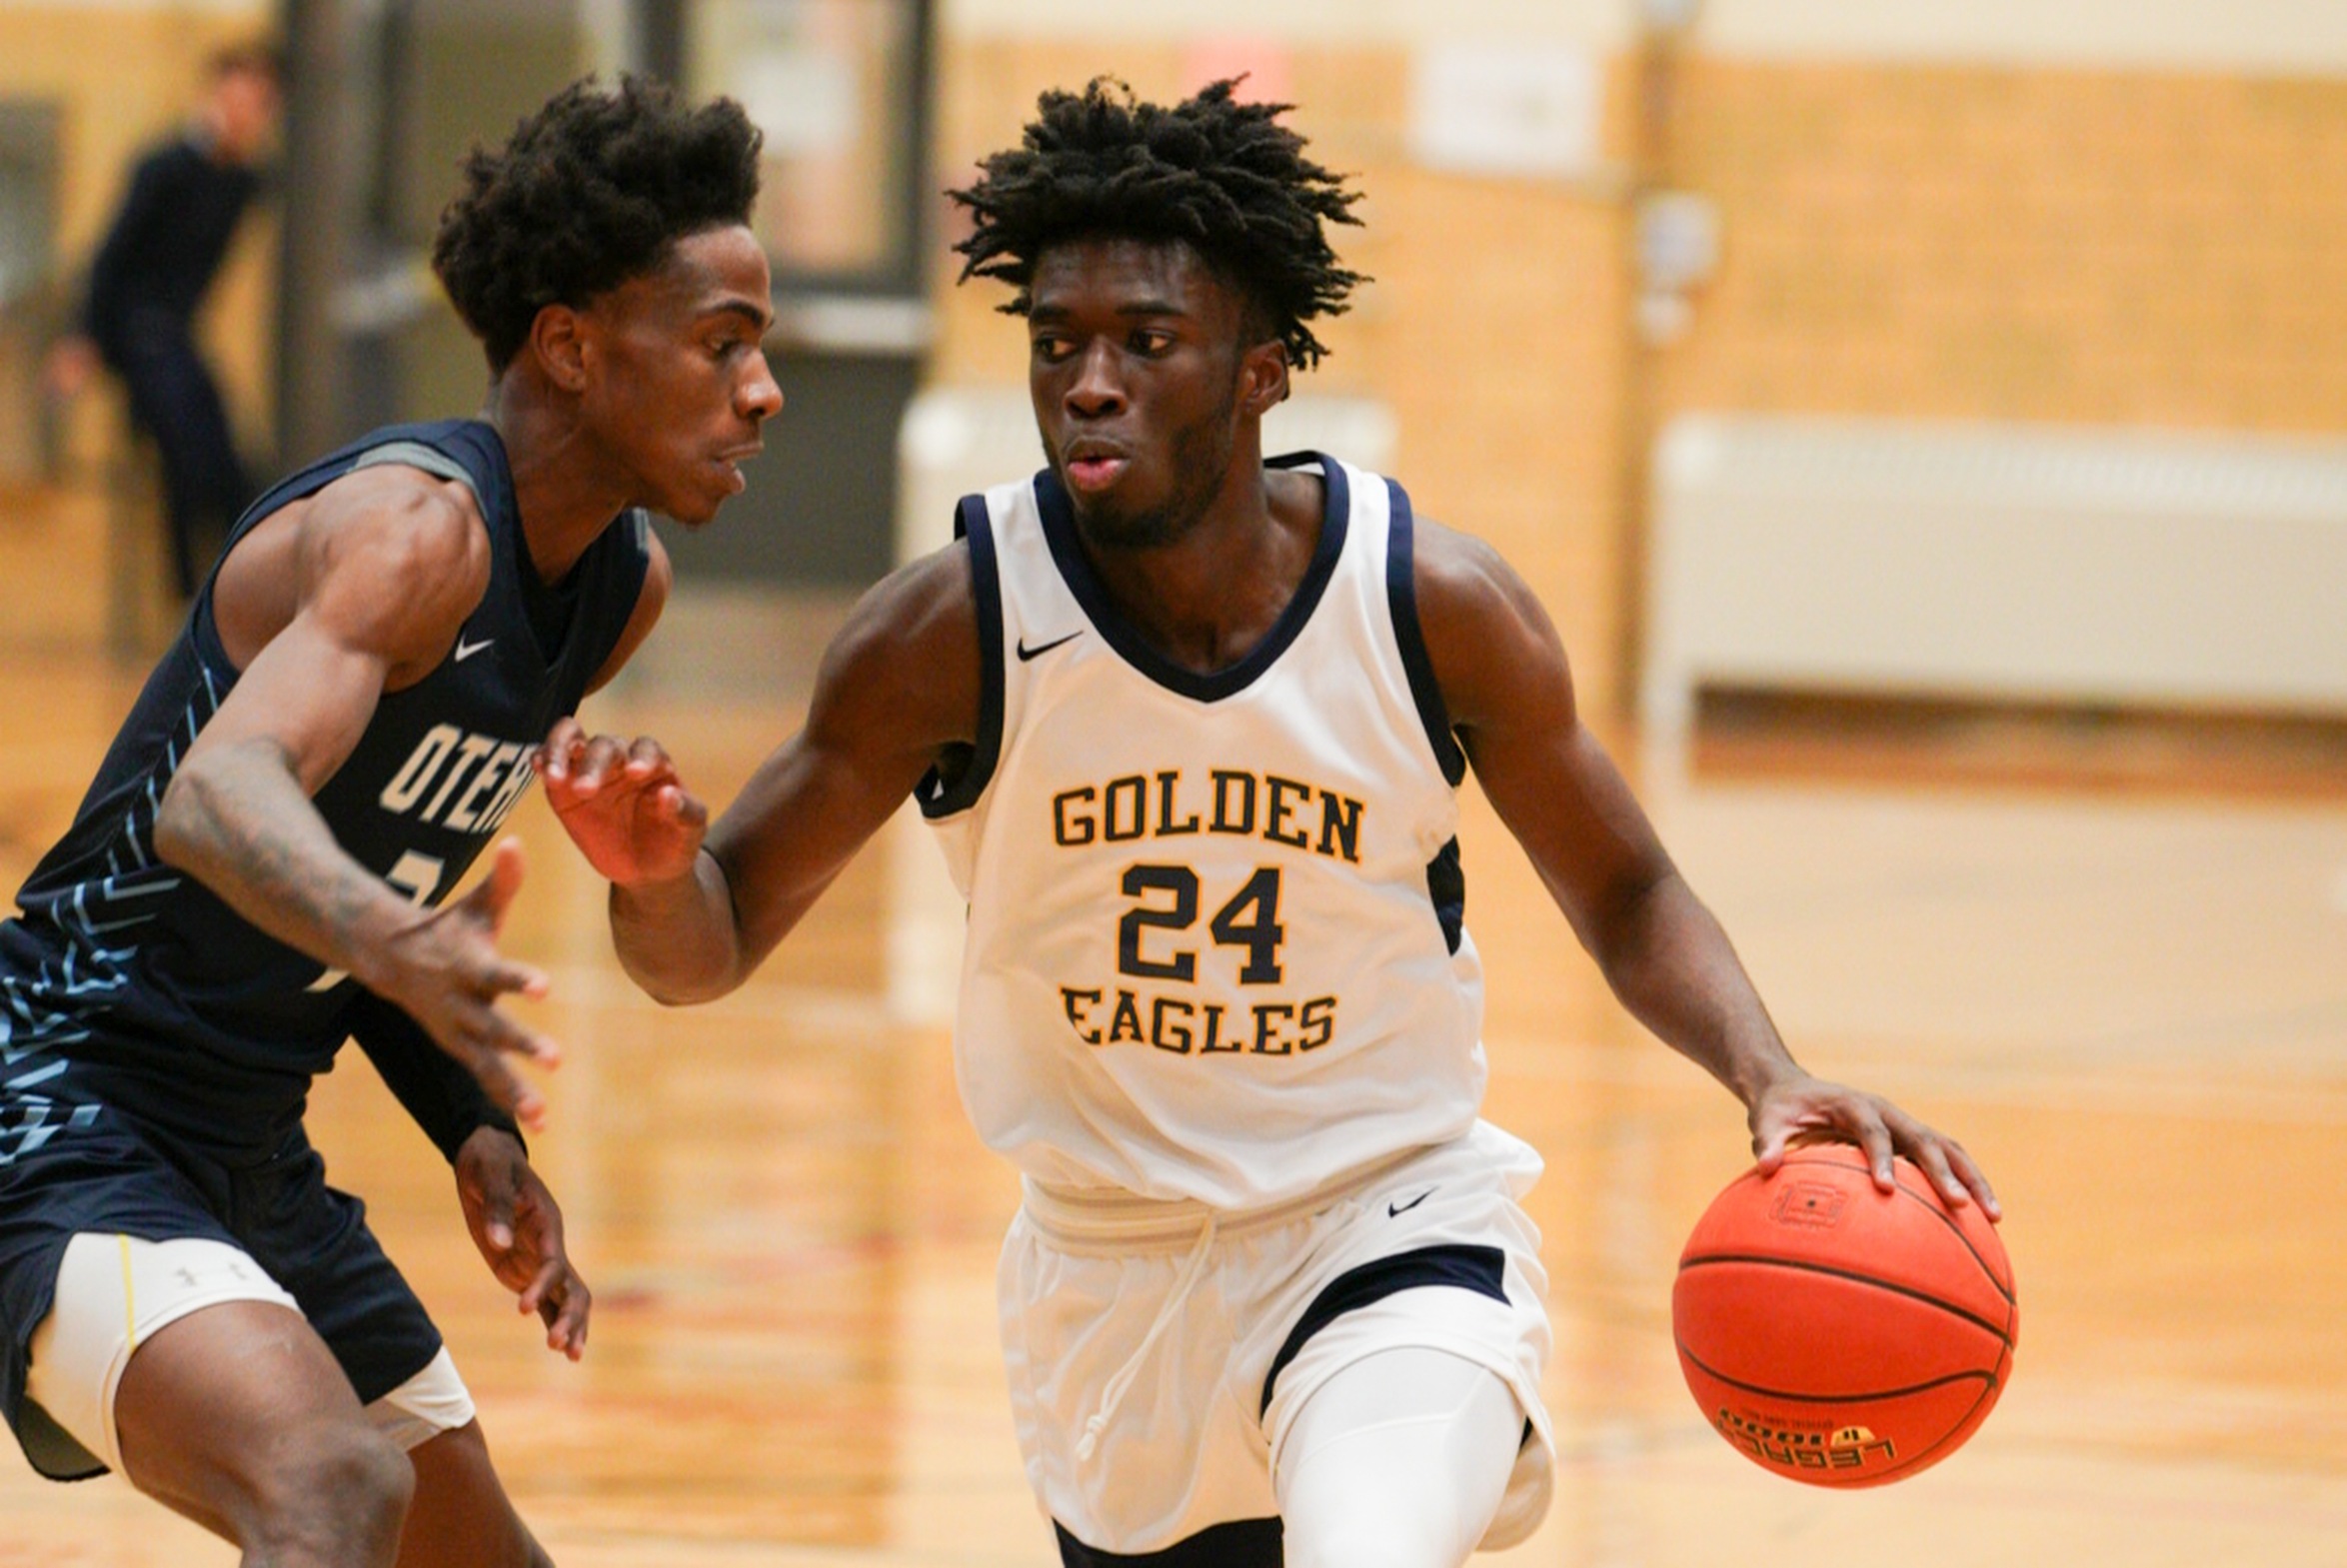 Golden Eagles soar past WNCC 77-59 in home rout